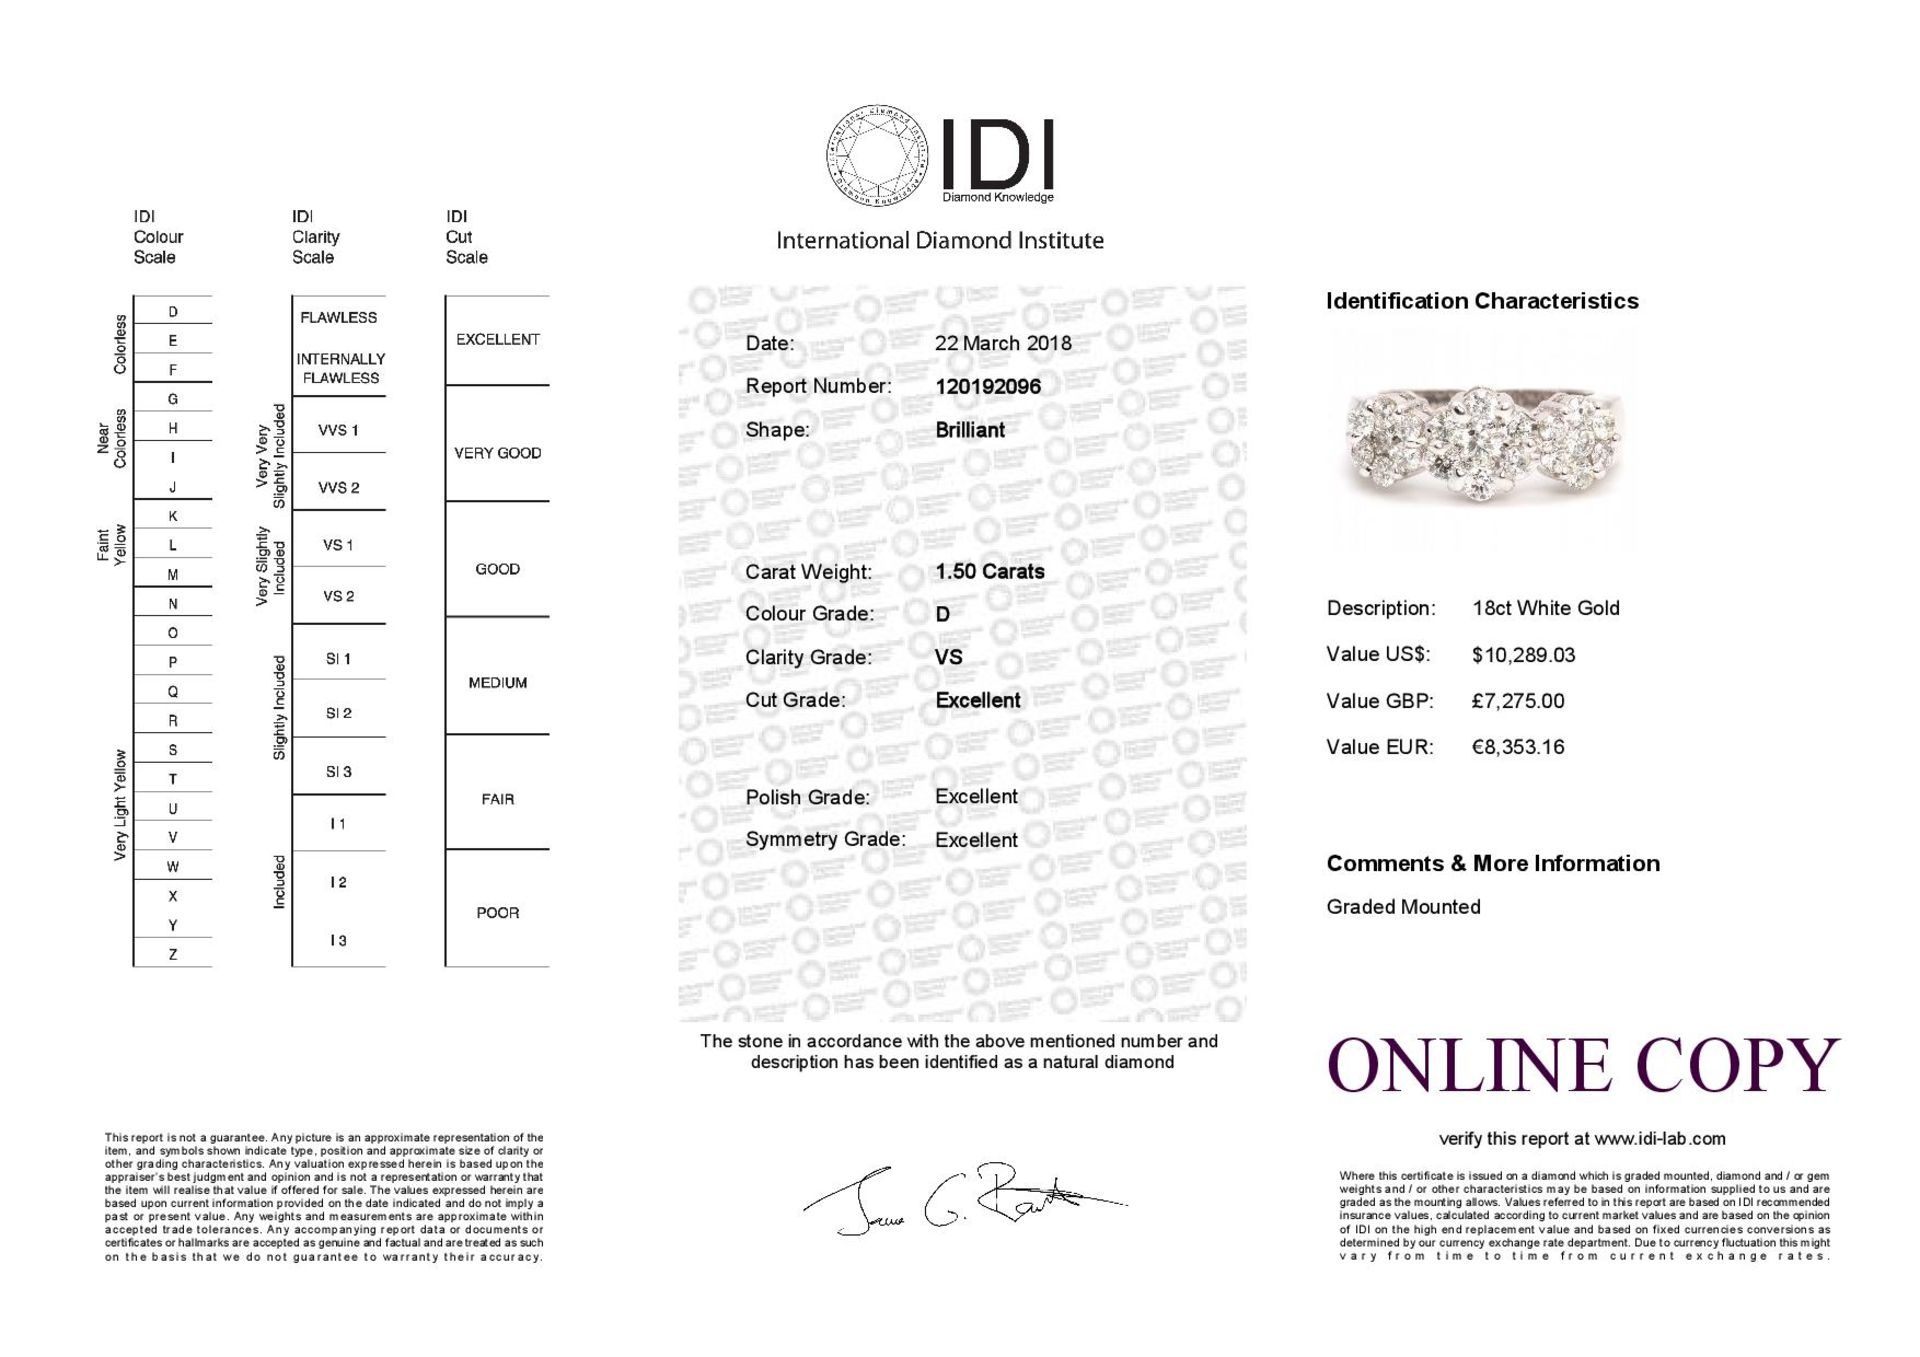 18ct White Gold Flower Cluster Diamond Ring 1.50 Carats - Valued by IDI £7,275.00 - Twenty one - Image 5 of 5